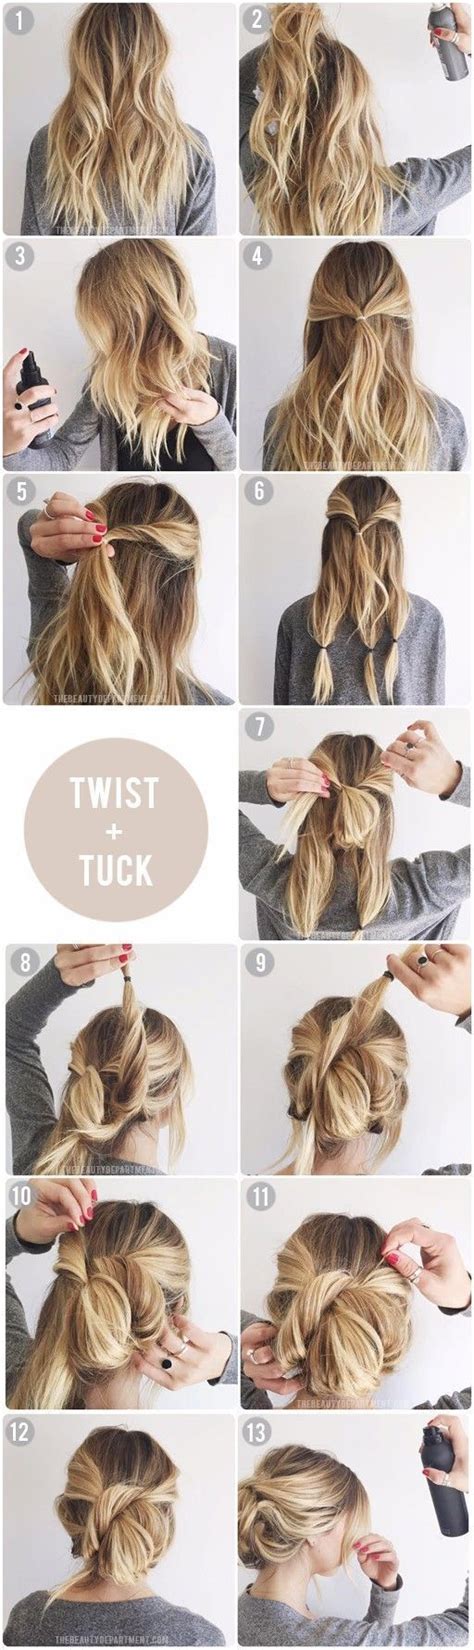 perfect cute ways to put hair up hairstyles inspiration stunning and